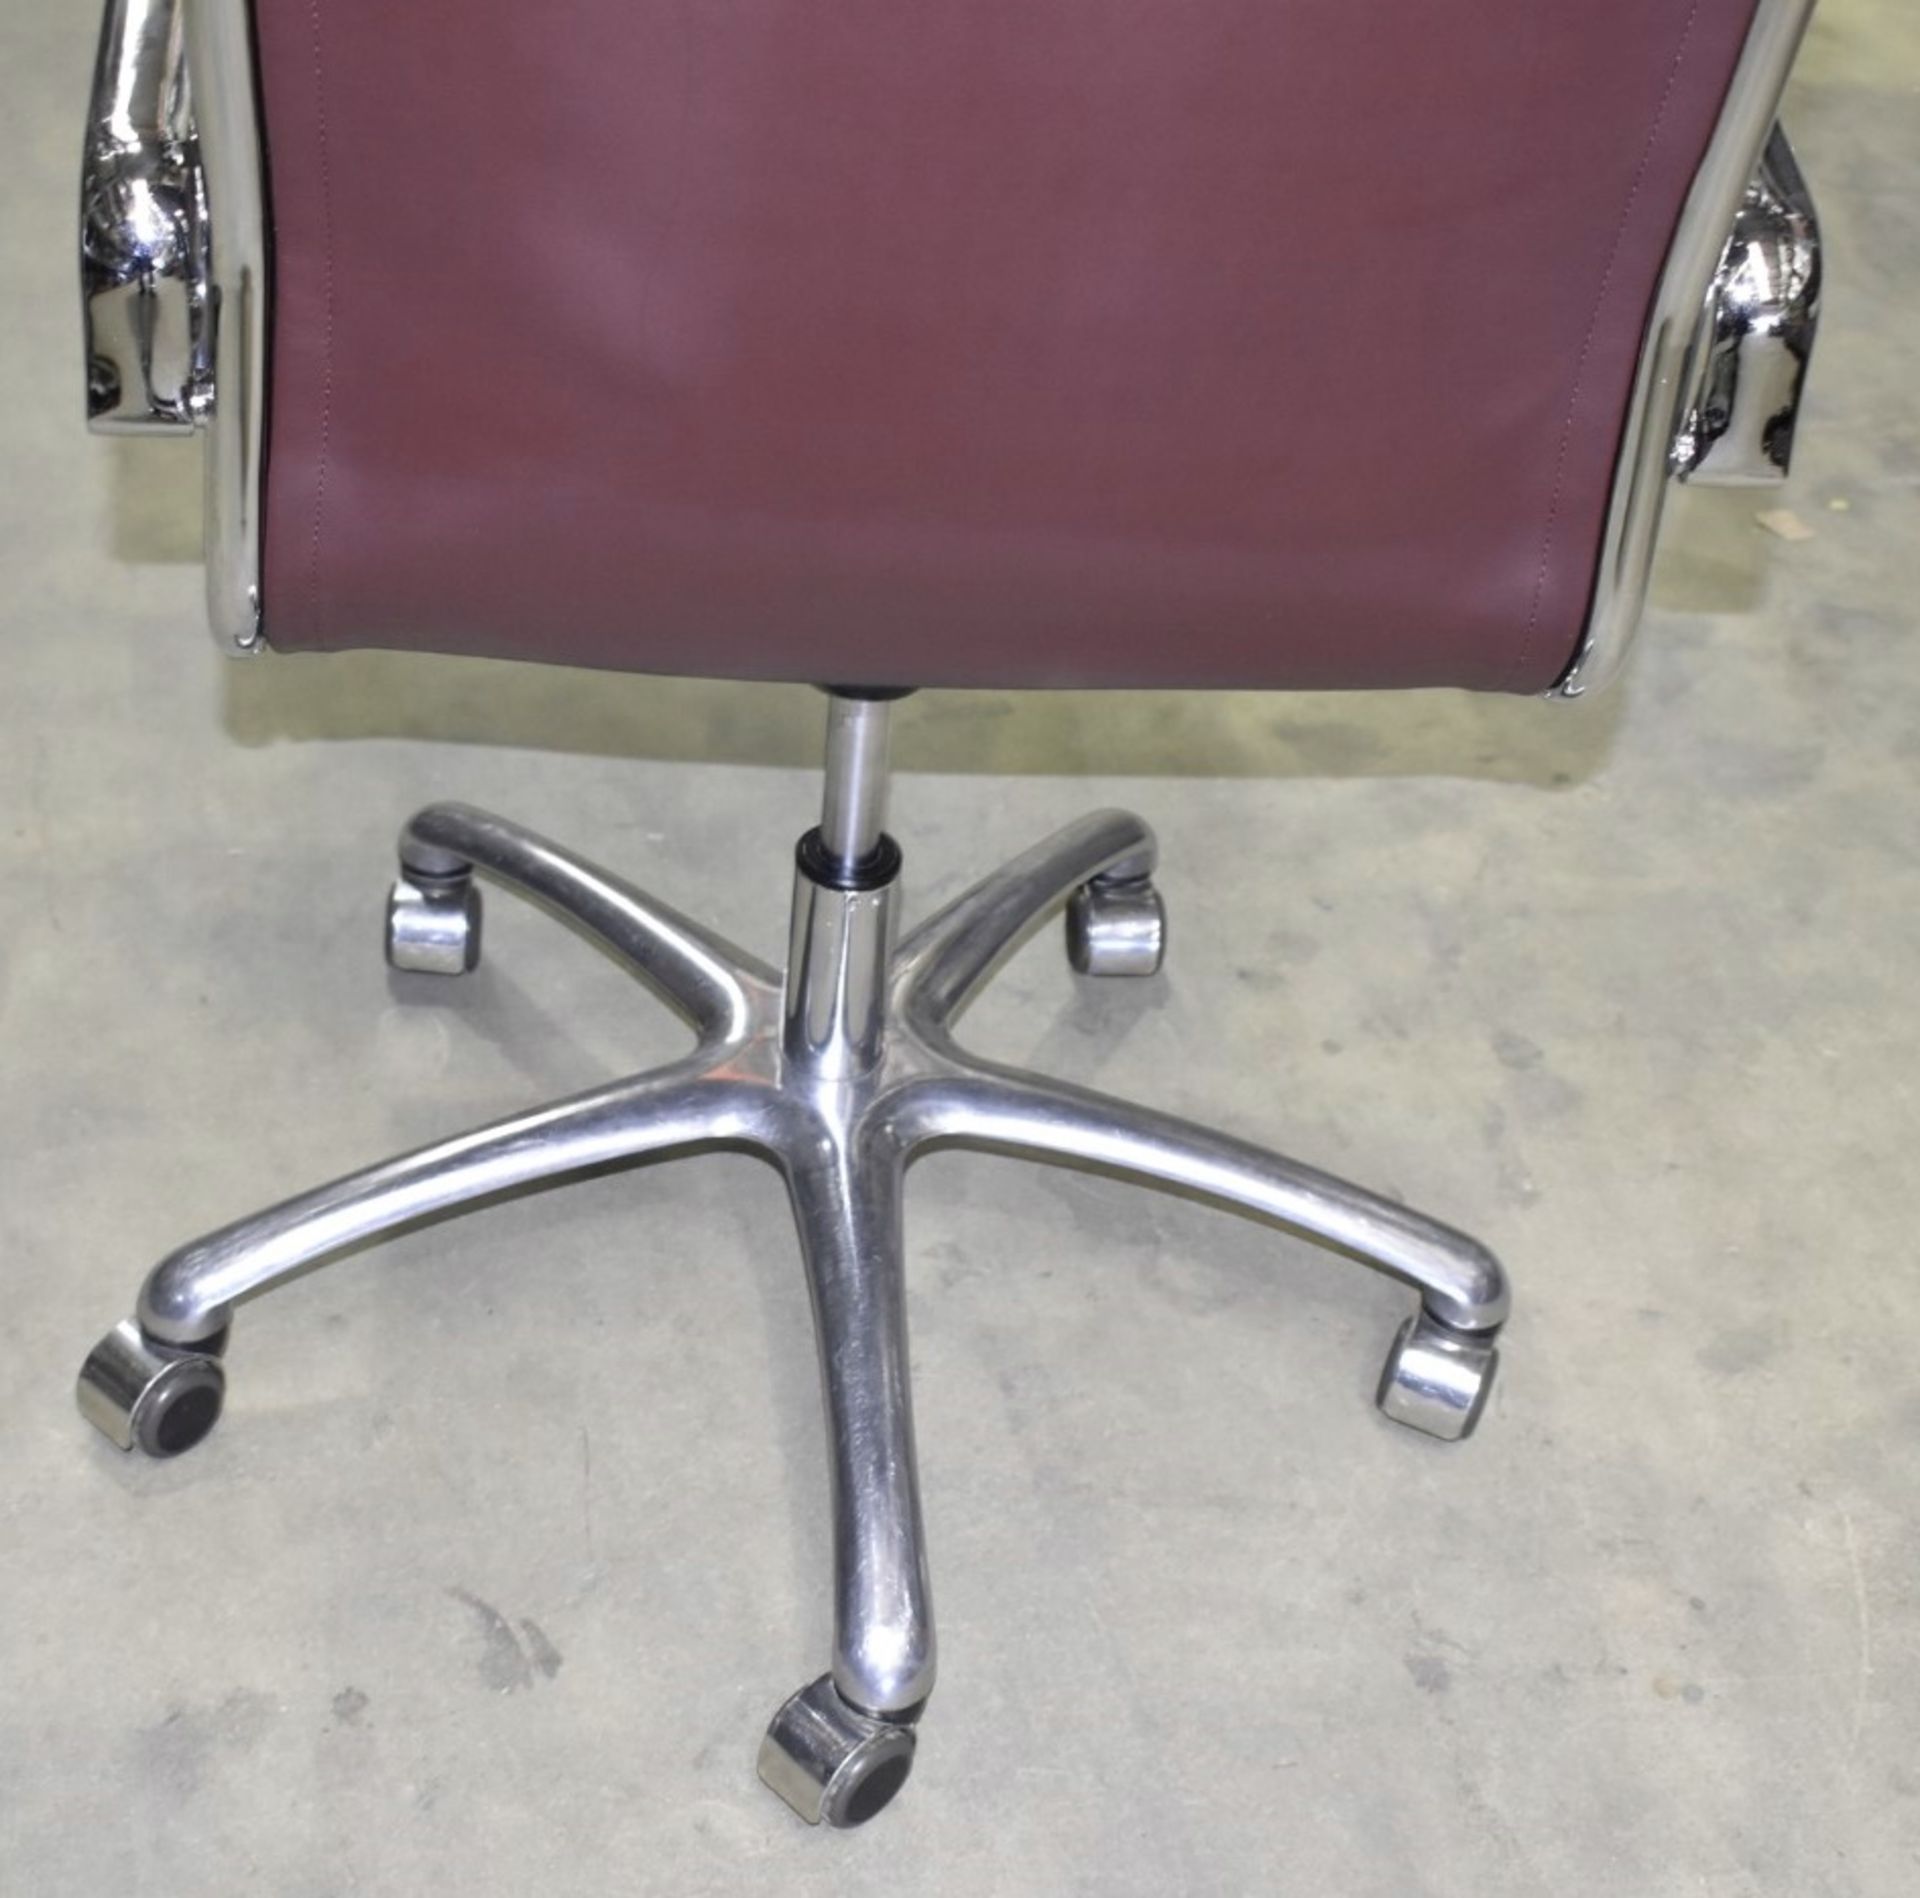 1 x LUXY Leather Upholstered Soft Pad Office Swivel Chair, Dark Brown - RRP £1,600 - Image 3 of 8